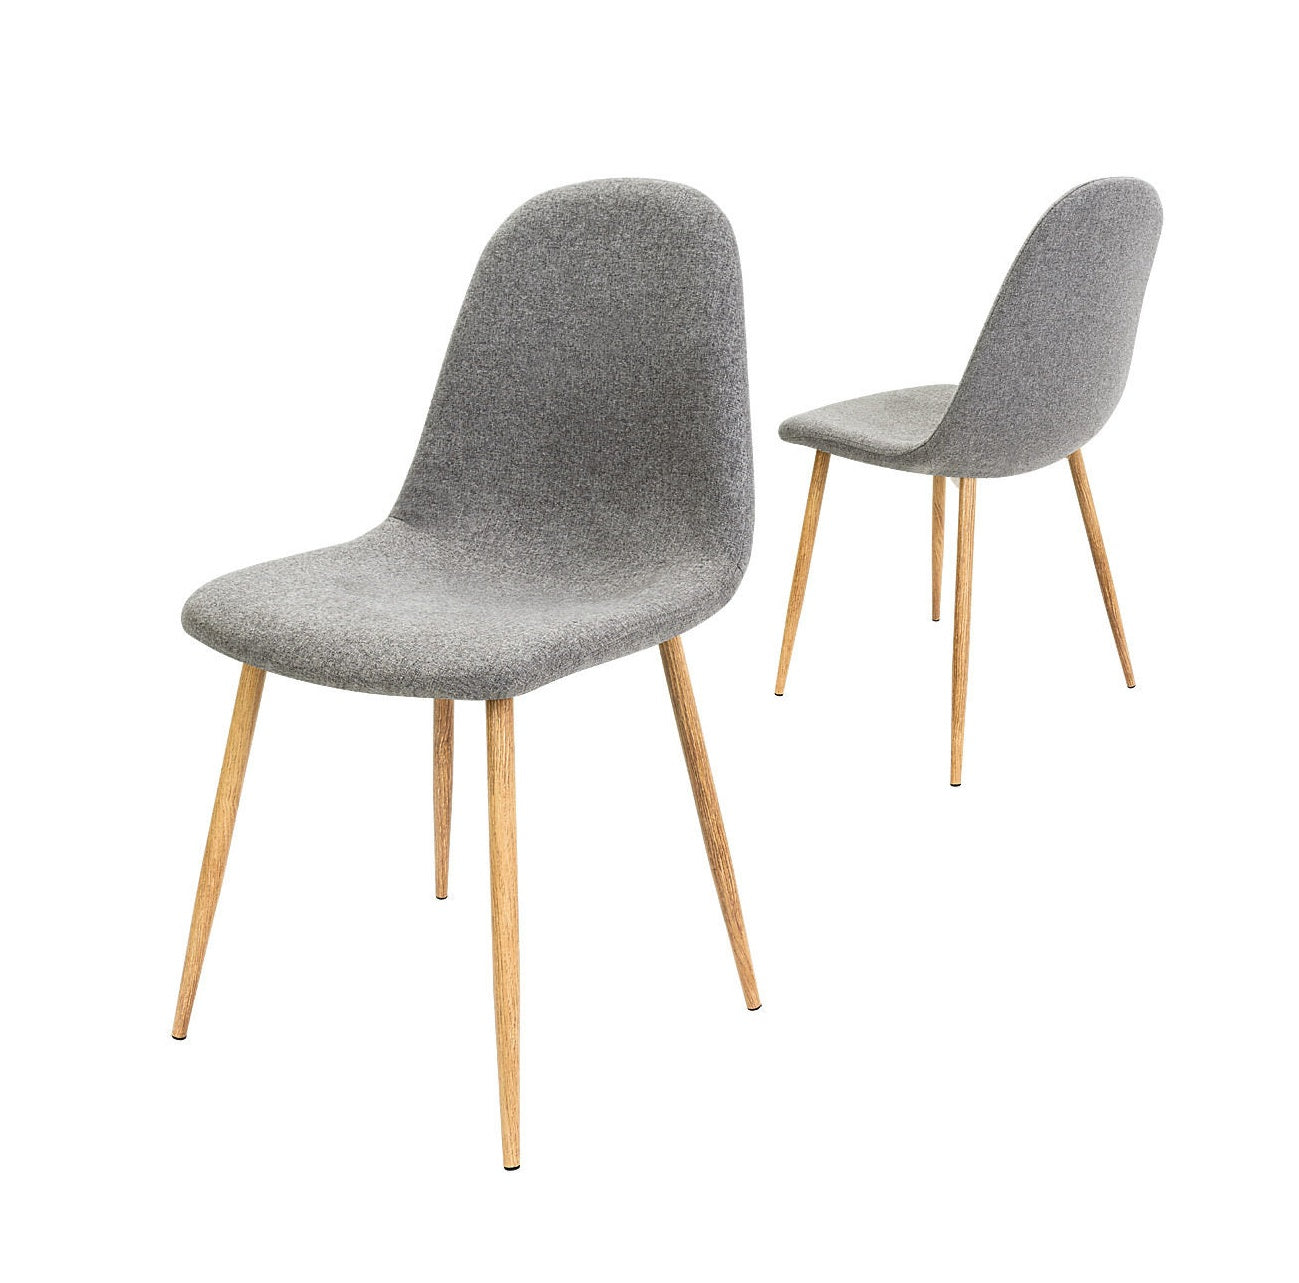 Trendy Residential Design Dining Chairs Retro Wooden Look Steel Leg Fabric Seat